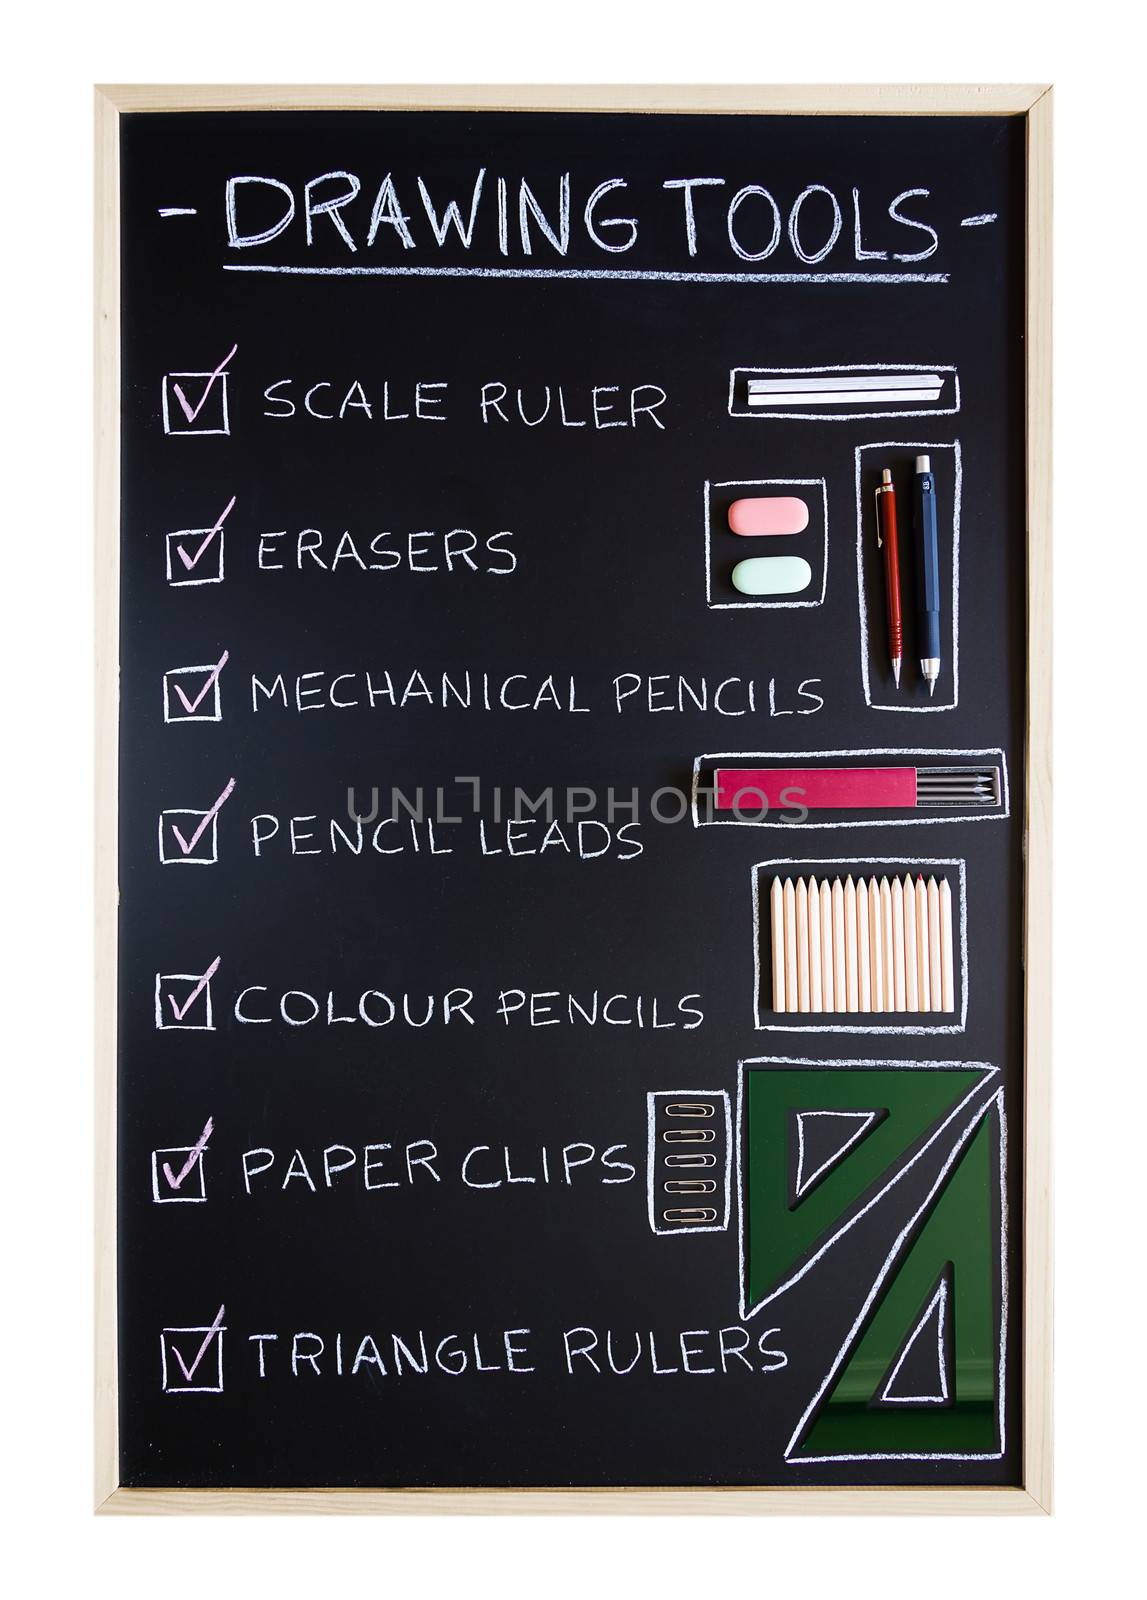 Drawing tools over blackboard background by doble.d